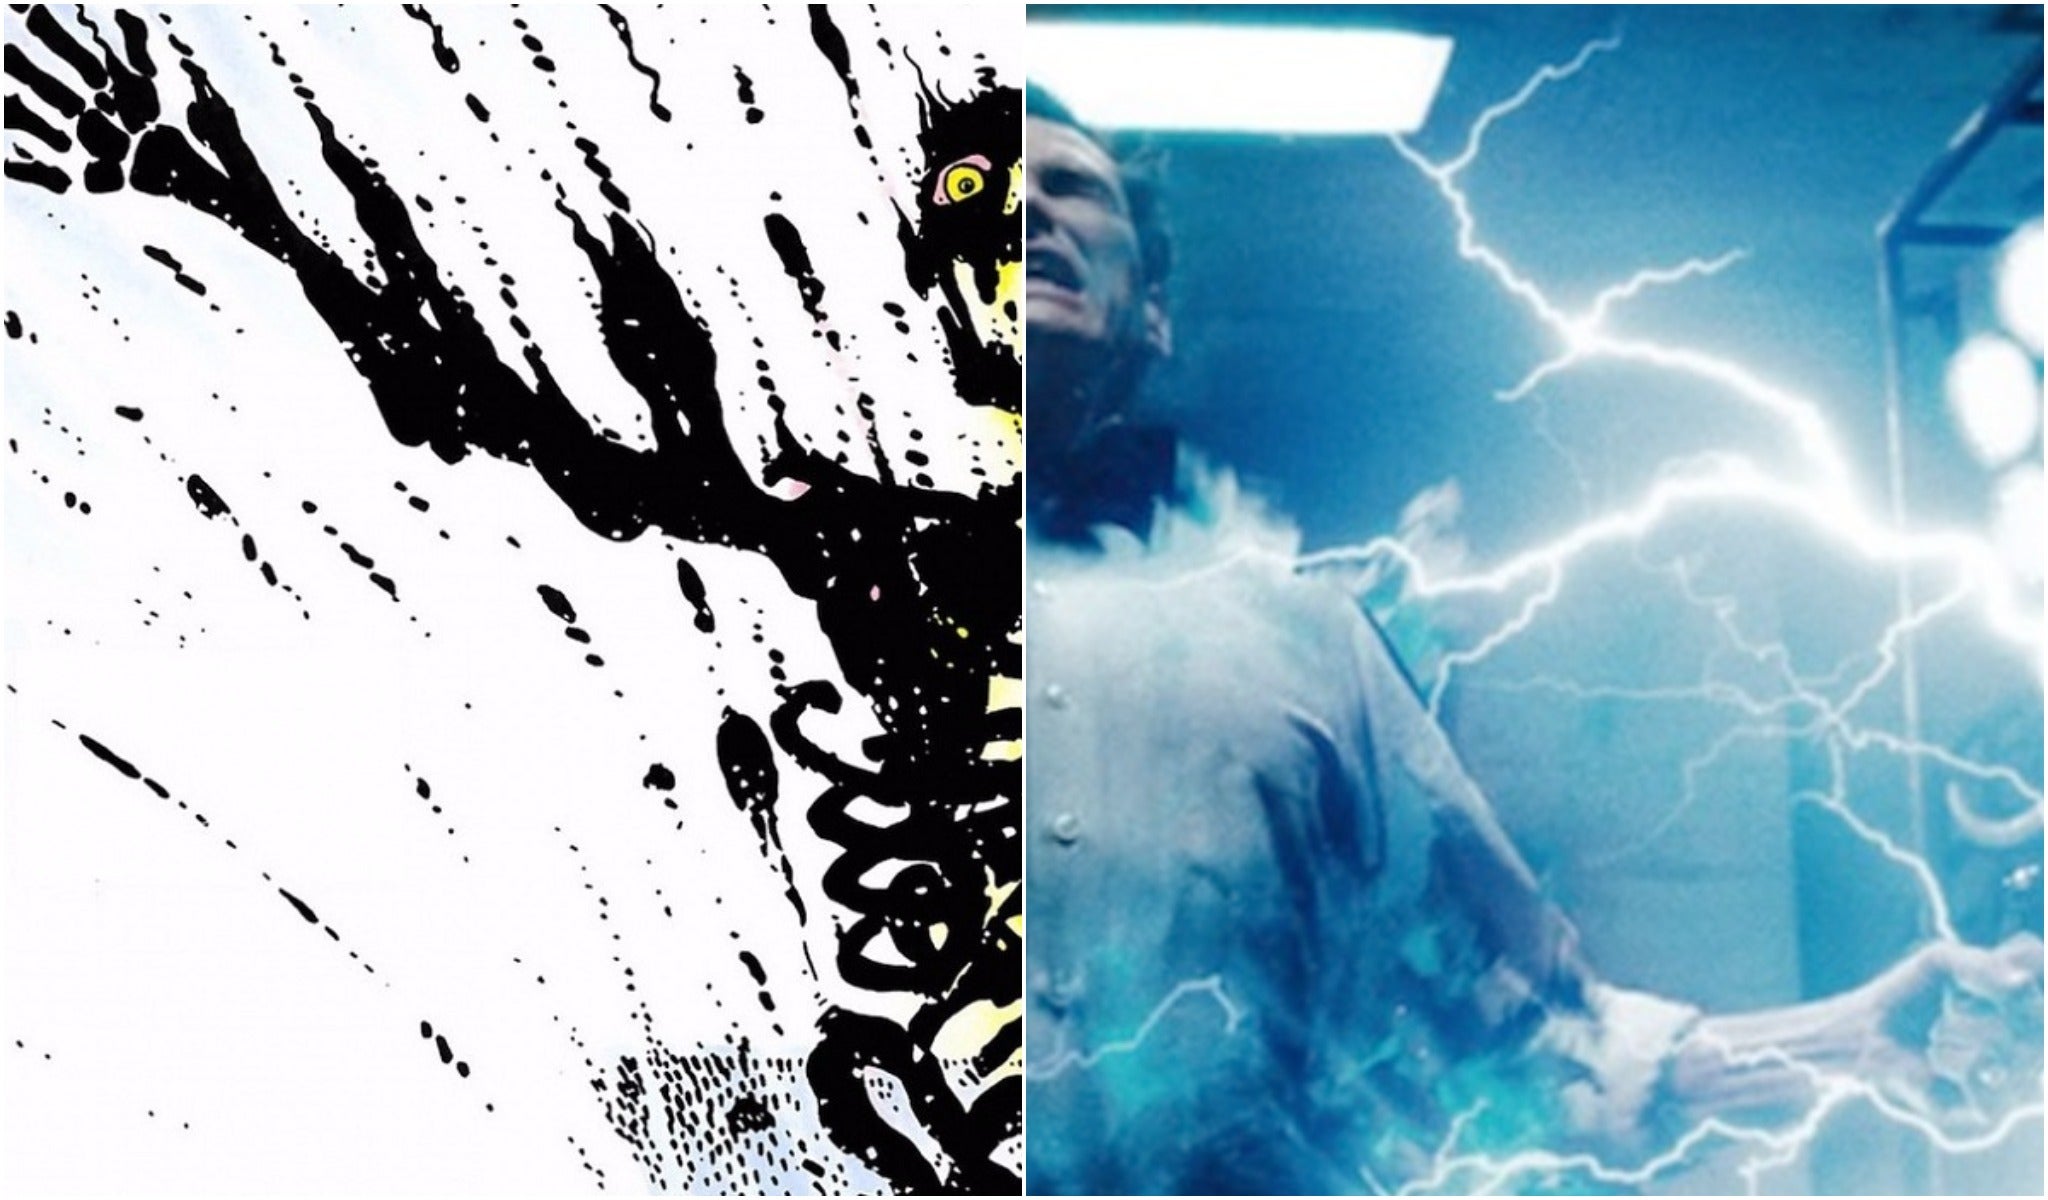 A scene from ‘Watchmen’ spliced with the same scene from the comic